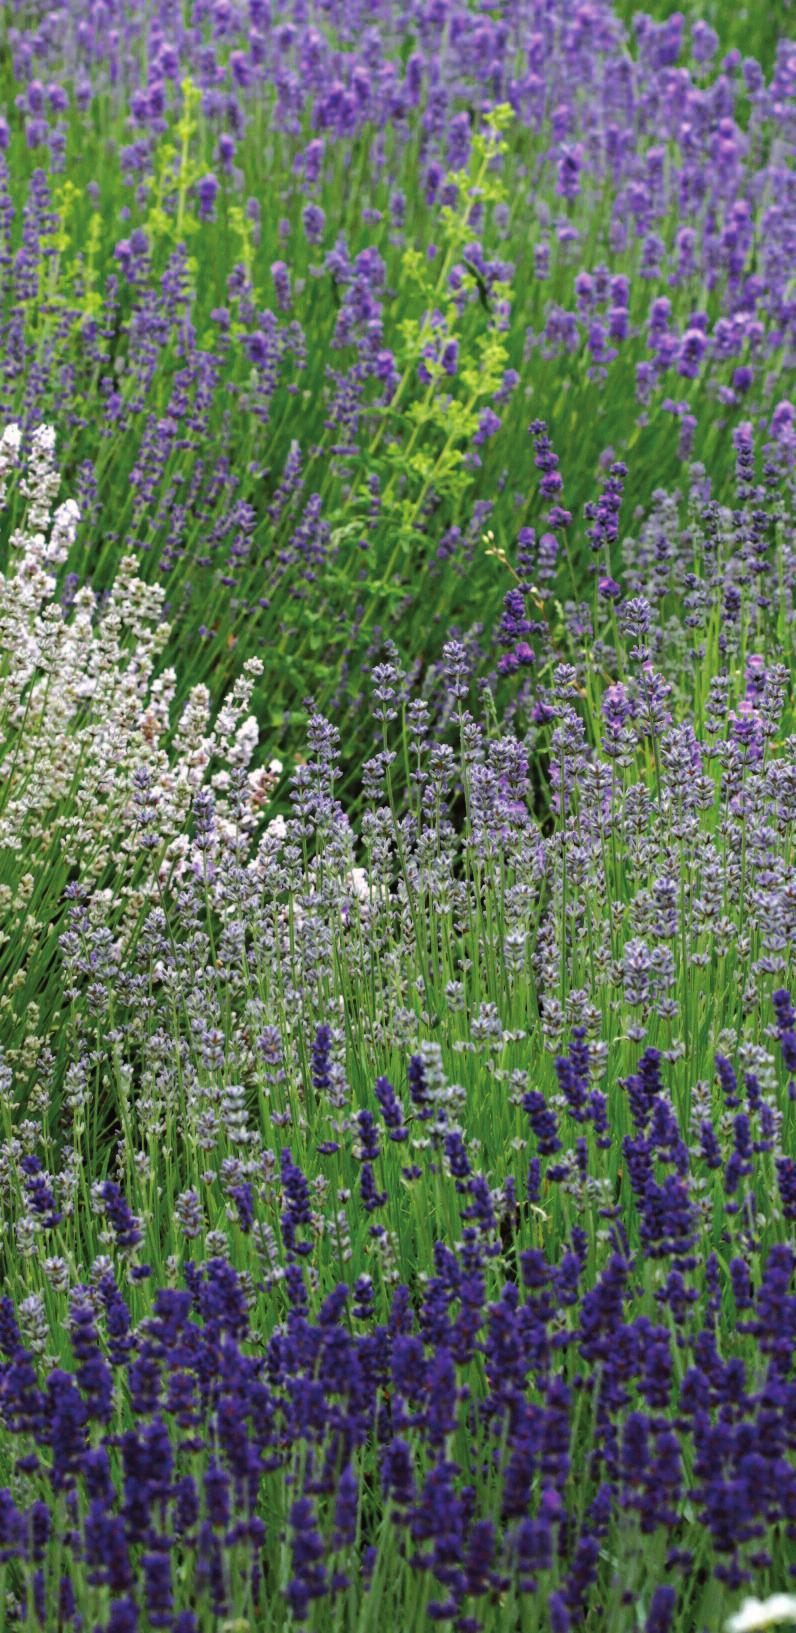 Revered by ancient herbalists and cooks, lavender is a delightful addition to modern gardens and kitchens.